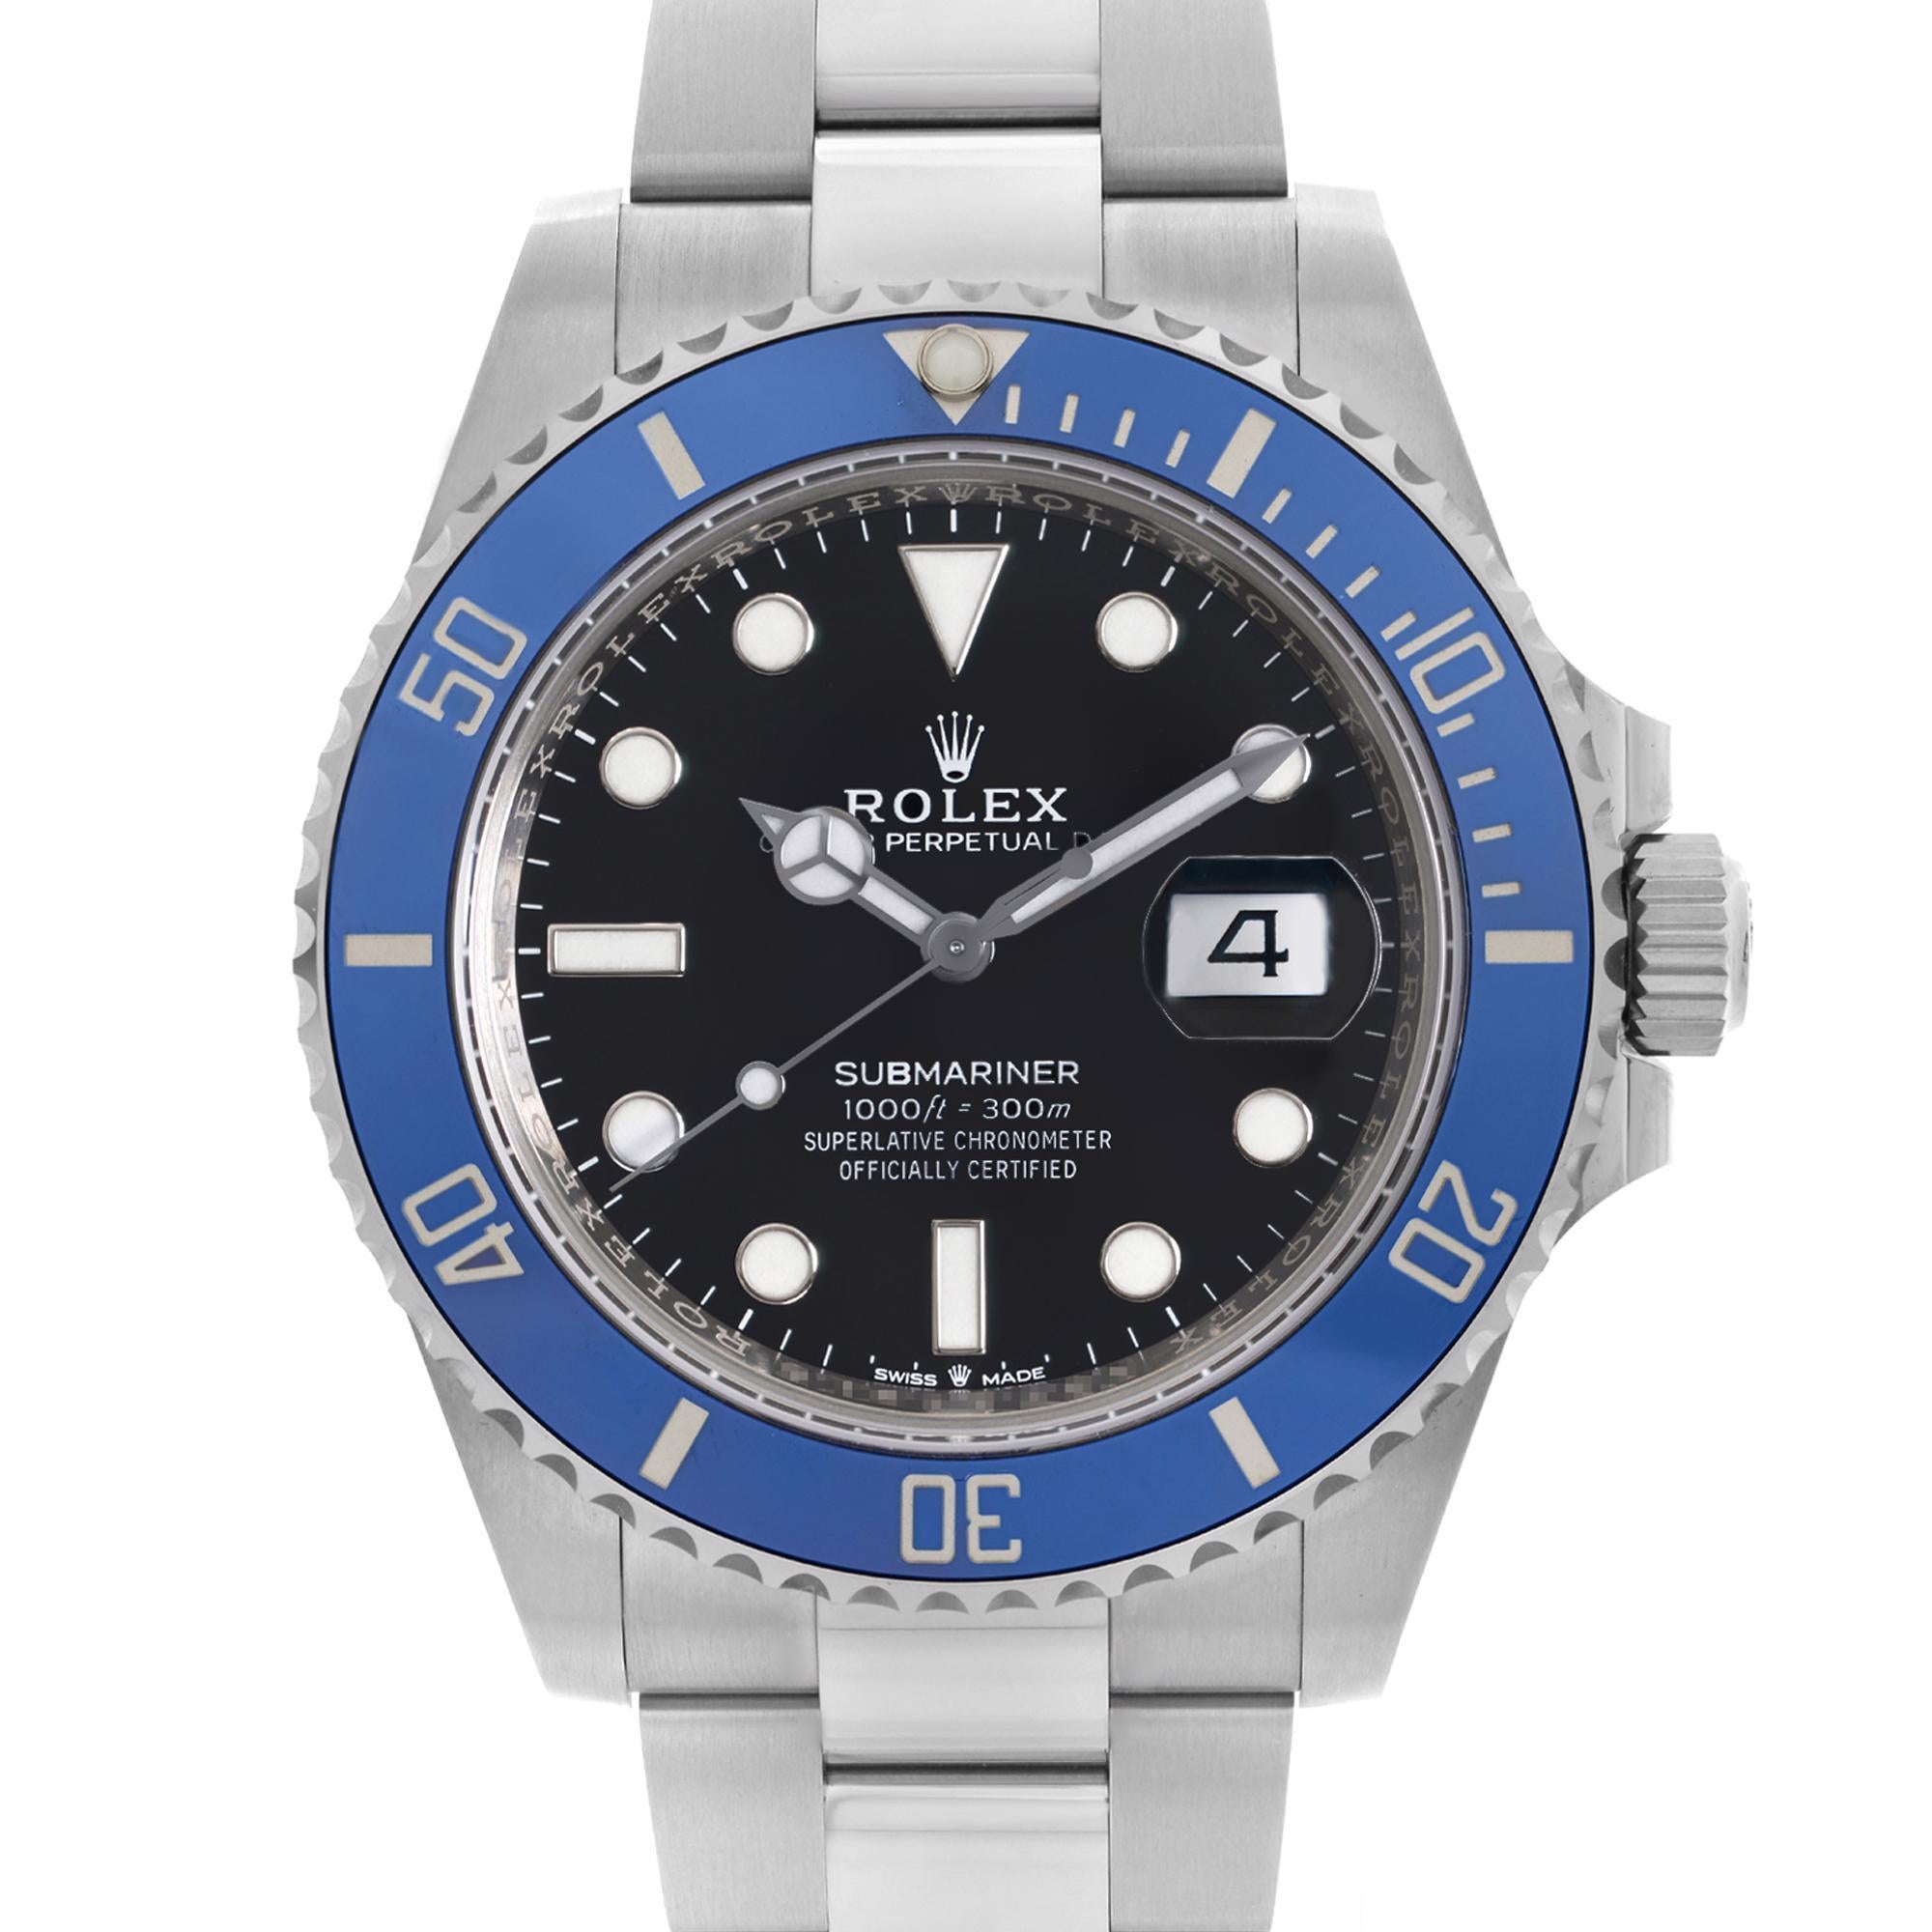 Unworn Rolex Submariner Date Oyster Perpetual 41mm 18k White Gold Black Dial Mens Automatic Watch 126619LB. The watch comes with a 2021 card. This Timepiece is powered by Mechanical (Automatic) Movement and Features: 18k White Gold Case with 18k